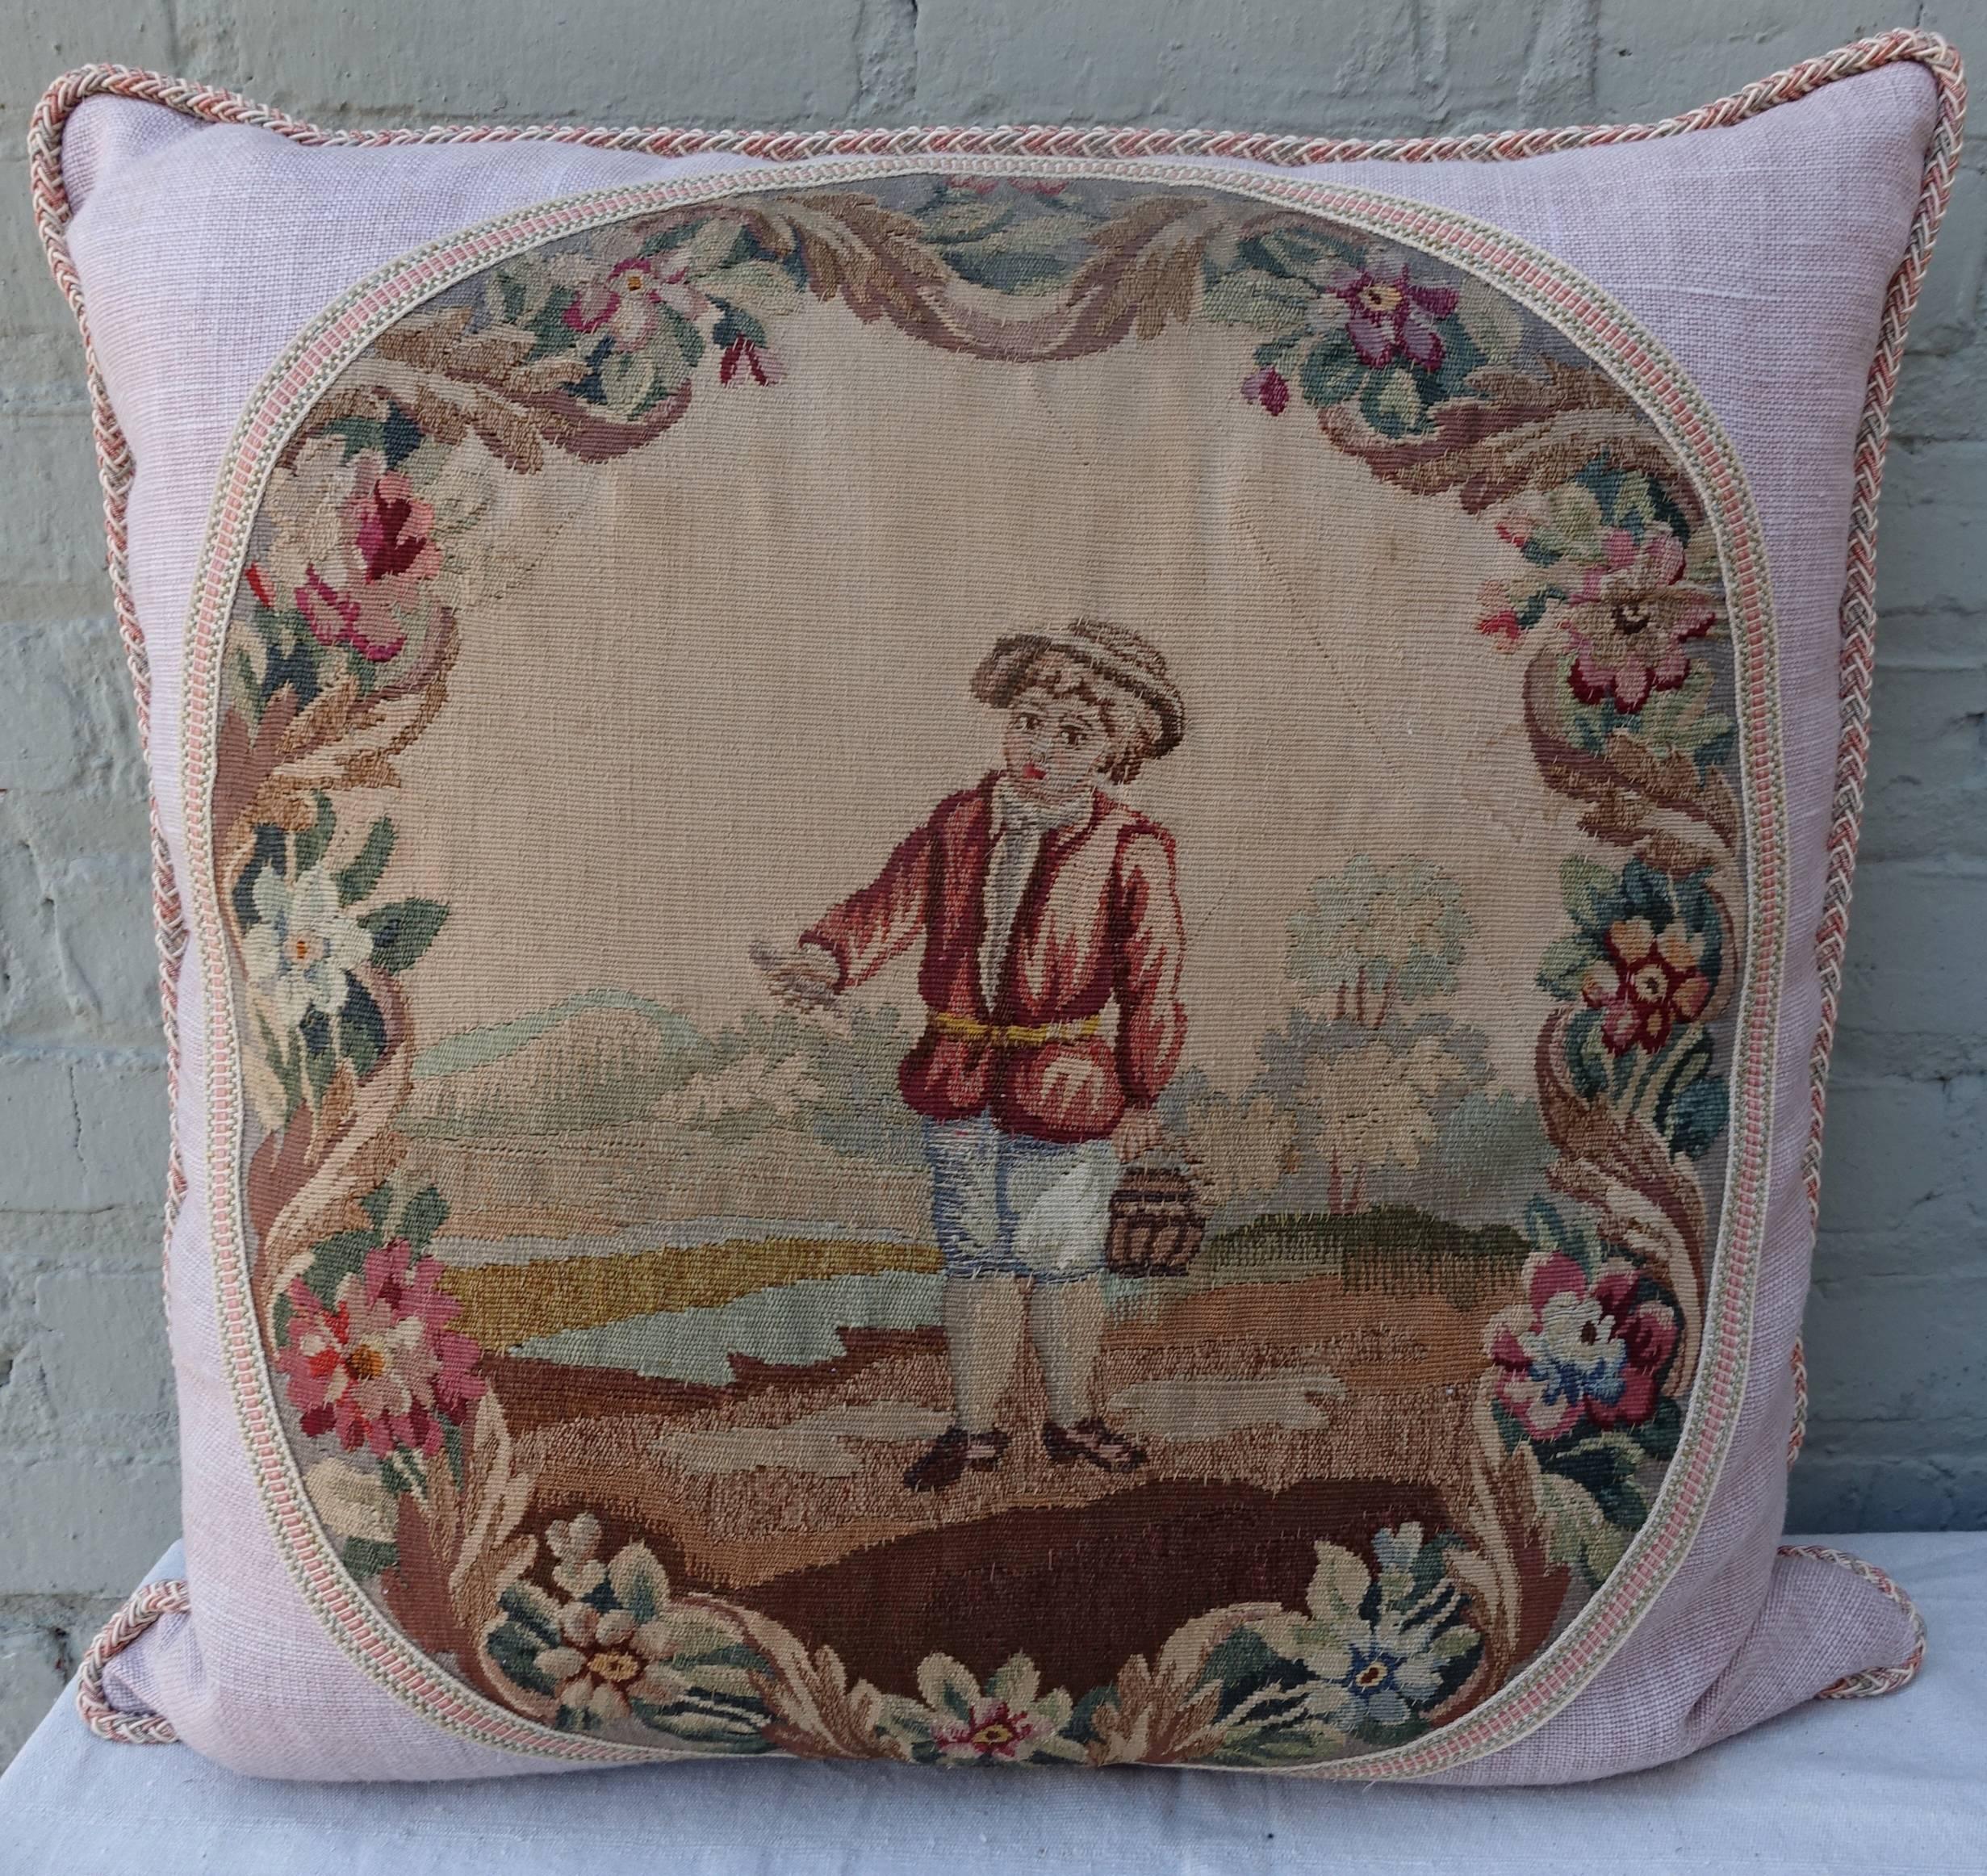 Pair of custom designed pillows made from 19th century French Aubusson figural tapestries (boy and girl) combined with a soft textured pink petal colored linen and detailed with a contrasting multicolored cording and tape. Down insert. Designed by